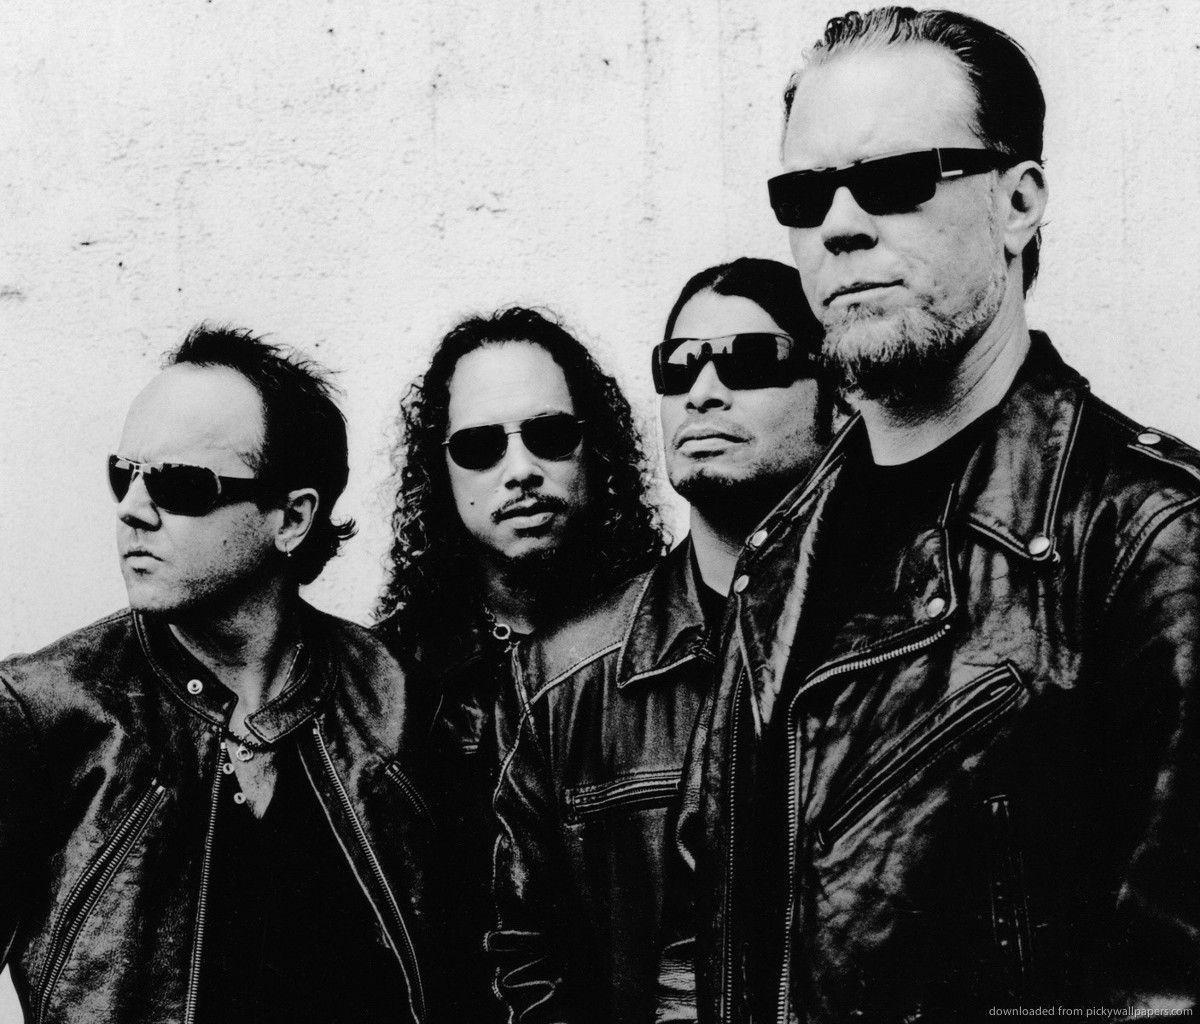 Download Metallica Black And White Photo Wallpaper For Samsung